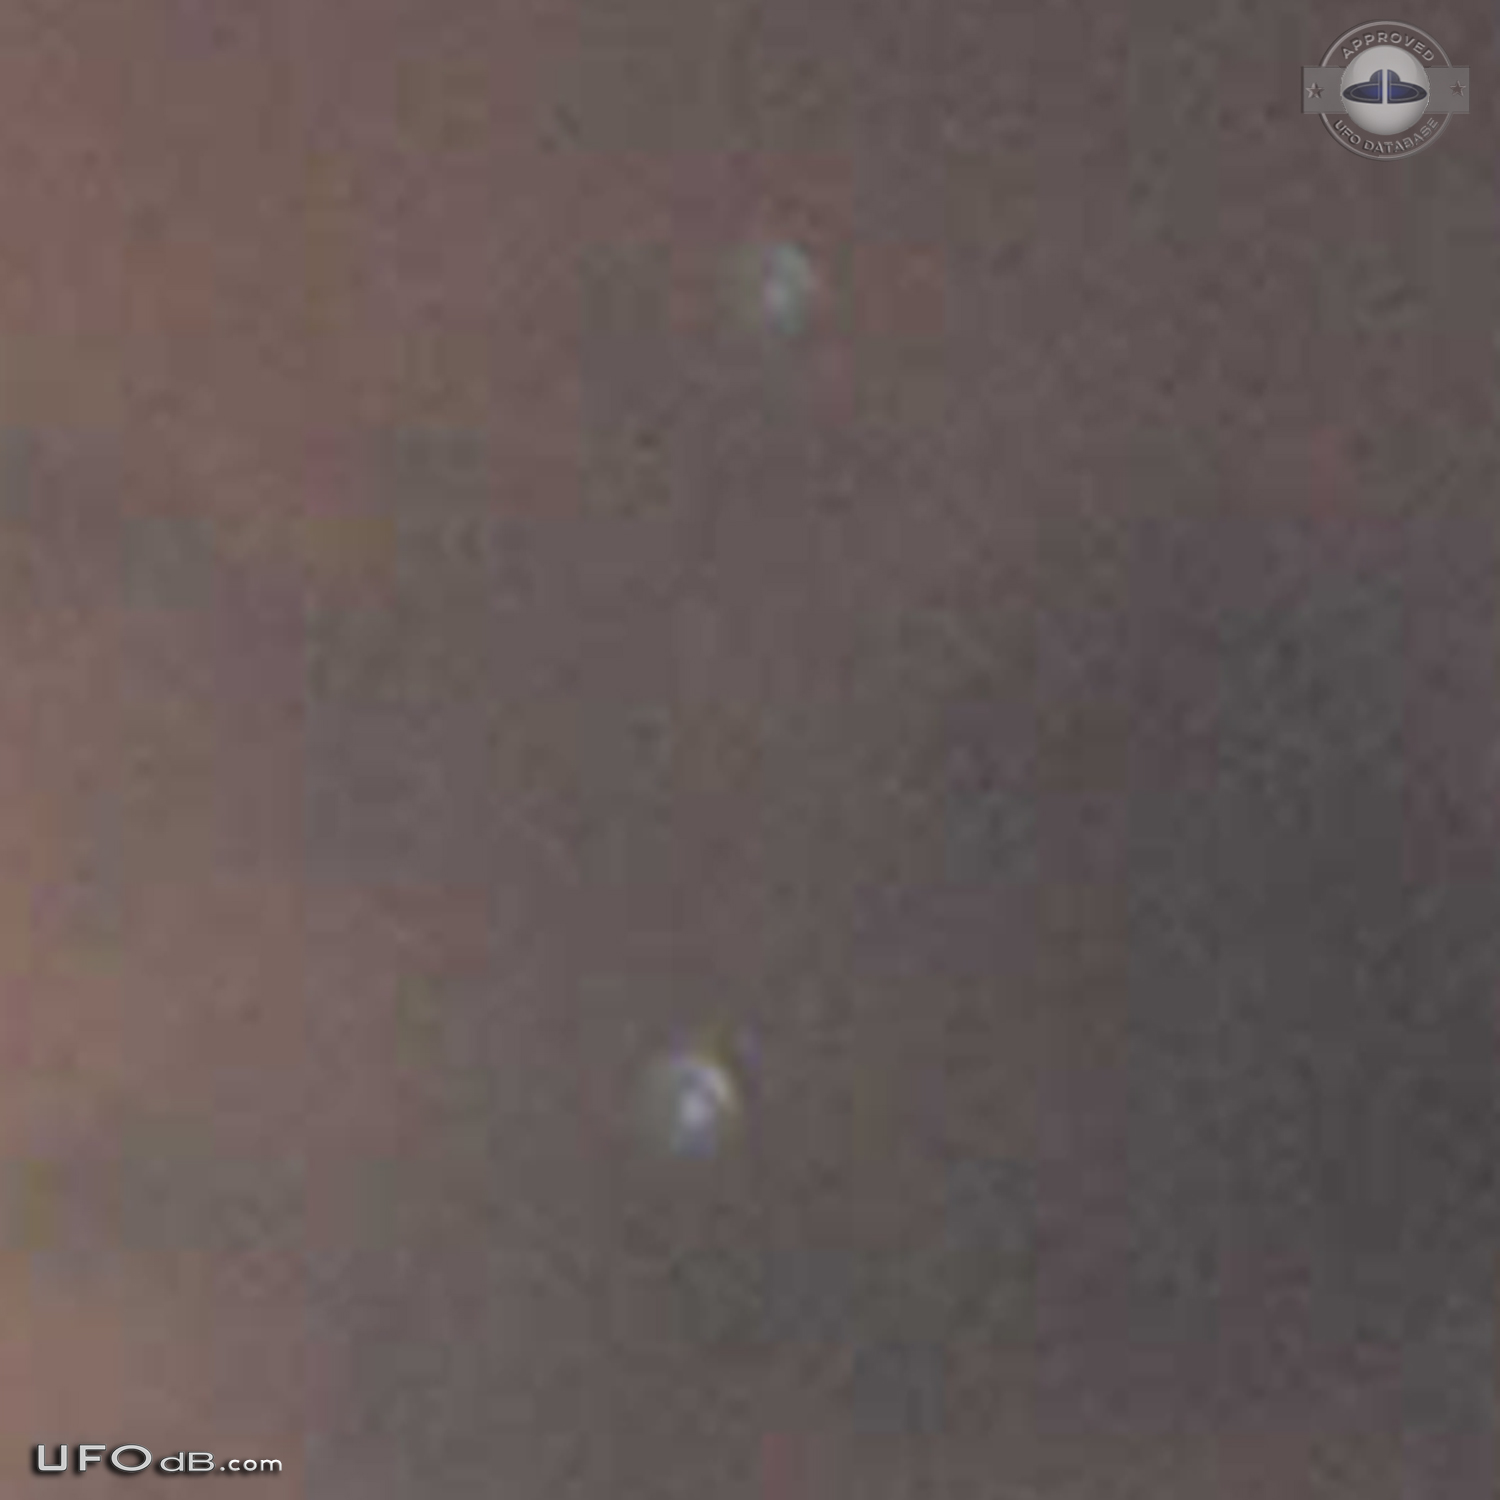 Triangular UFO formation caught on picture in Havana, Cuba in 2005 UFO Picture #442-4